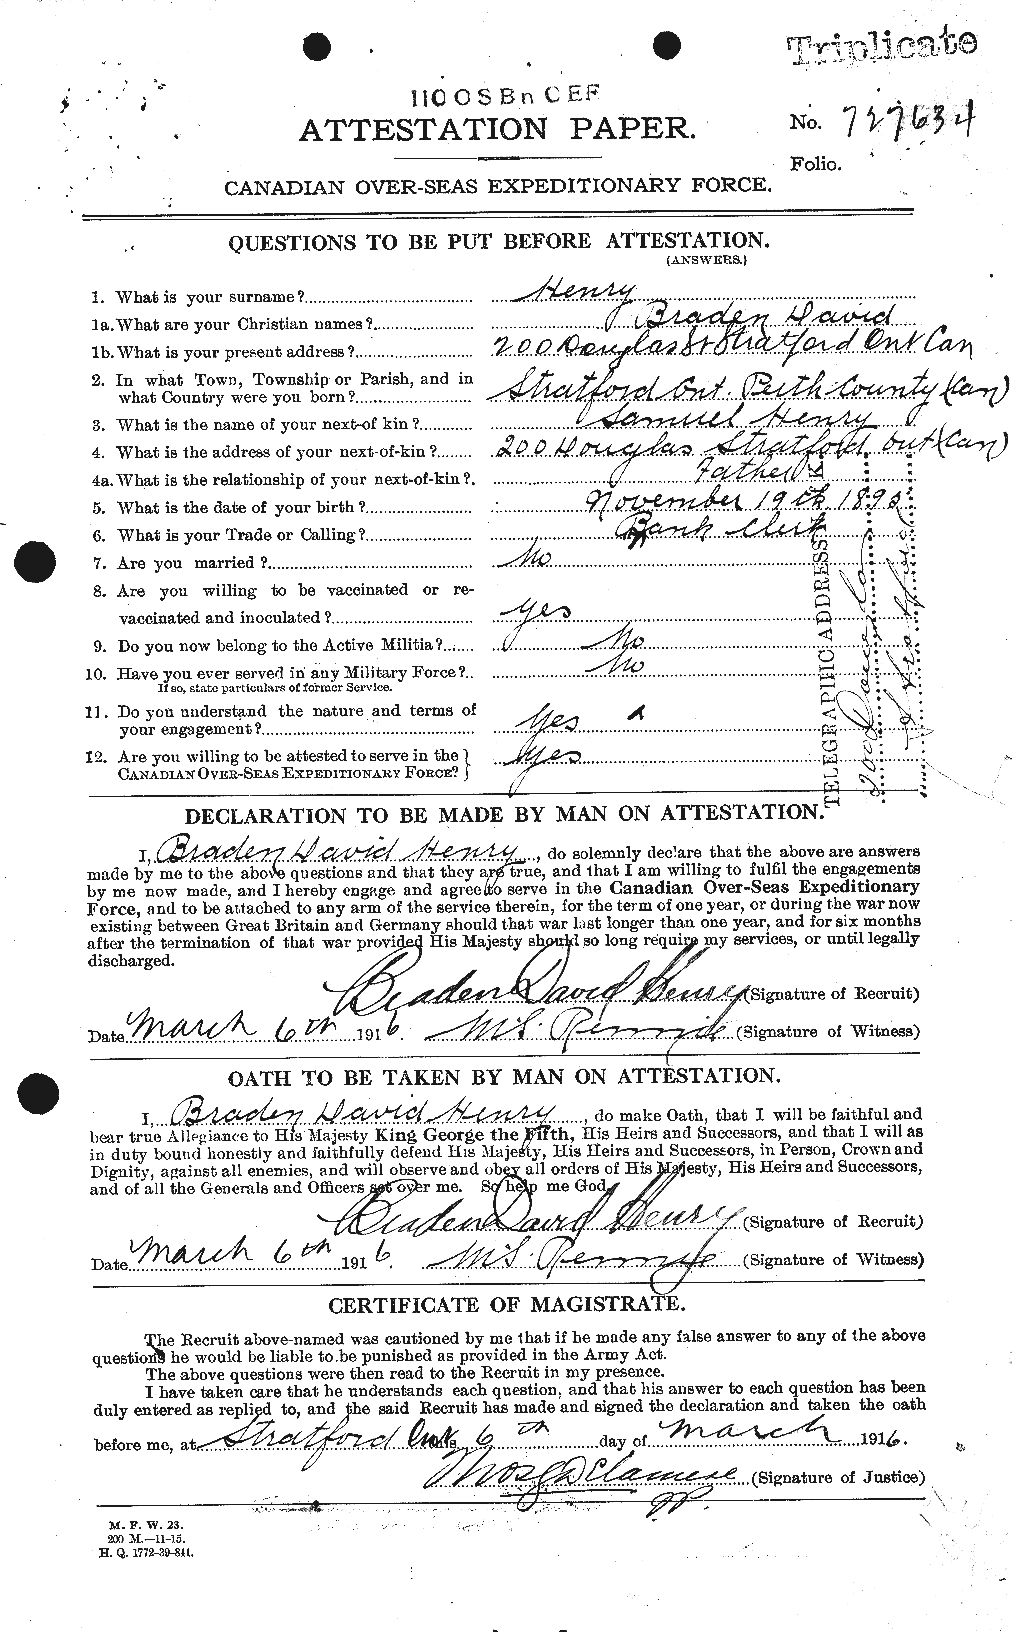 Personnel Records of the First World War - CEF 392793a